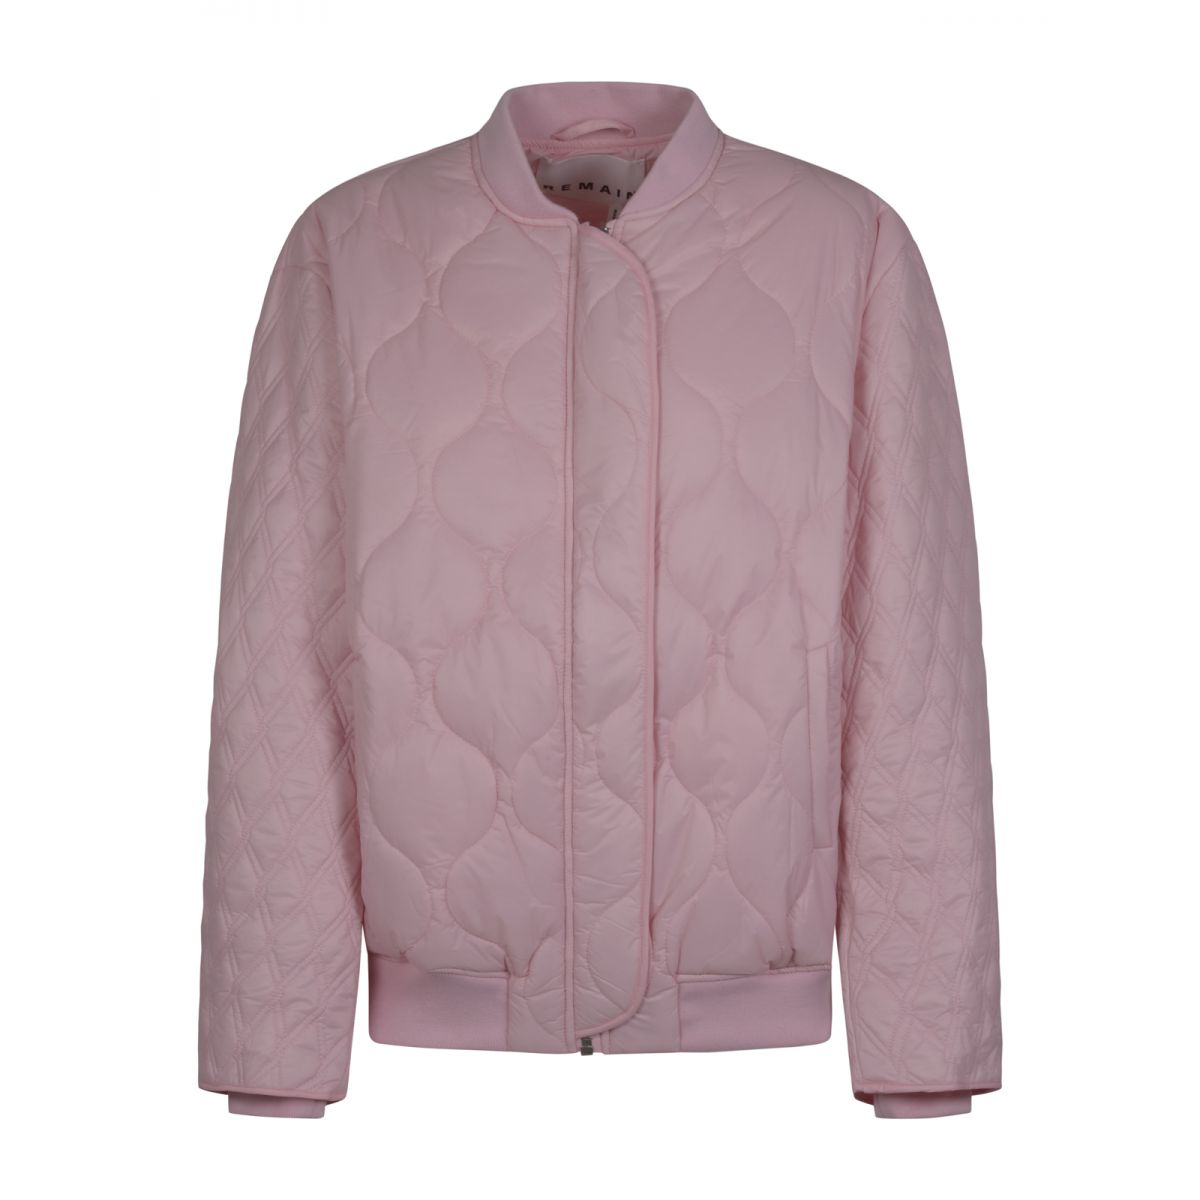 REMAIN - Quilted bomber jacket